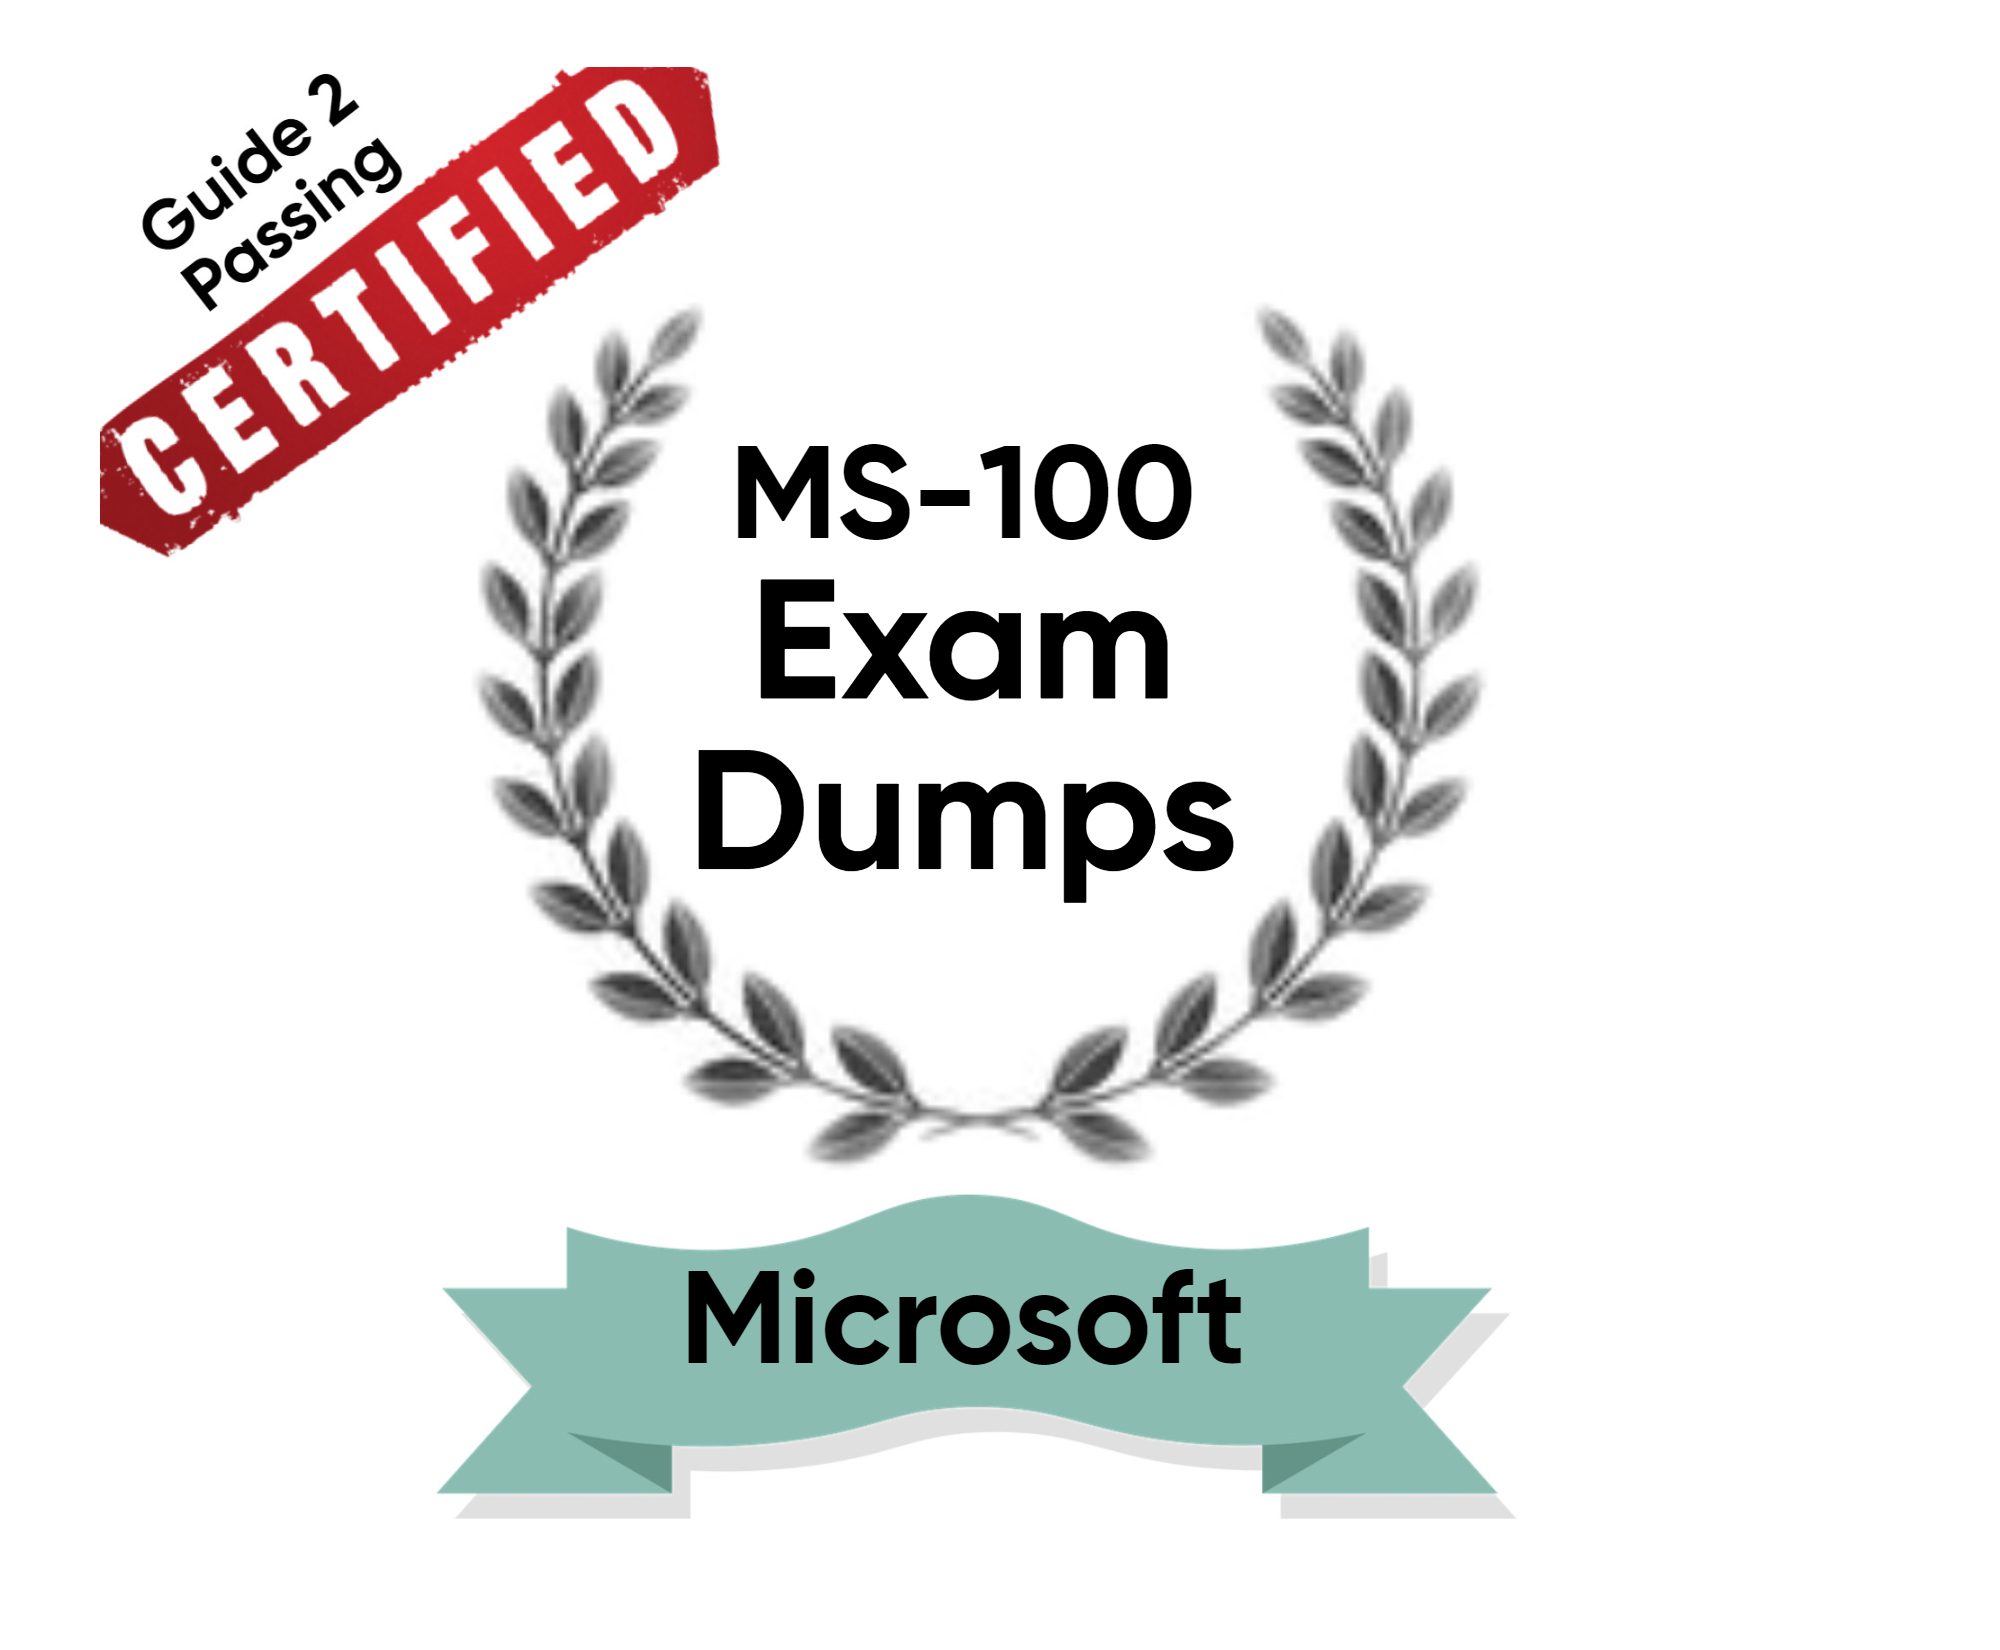 Pass Your Microsoft MS-100 Exam Dumps From Guide 2 Passing